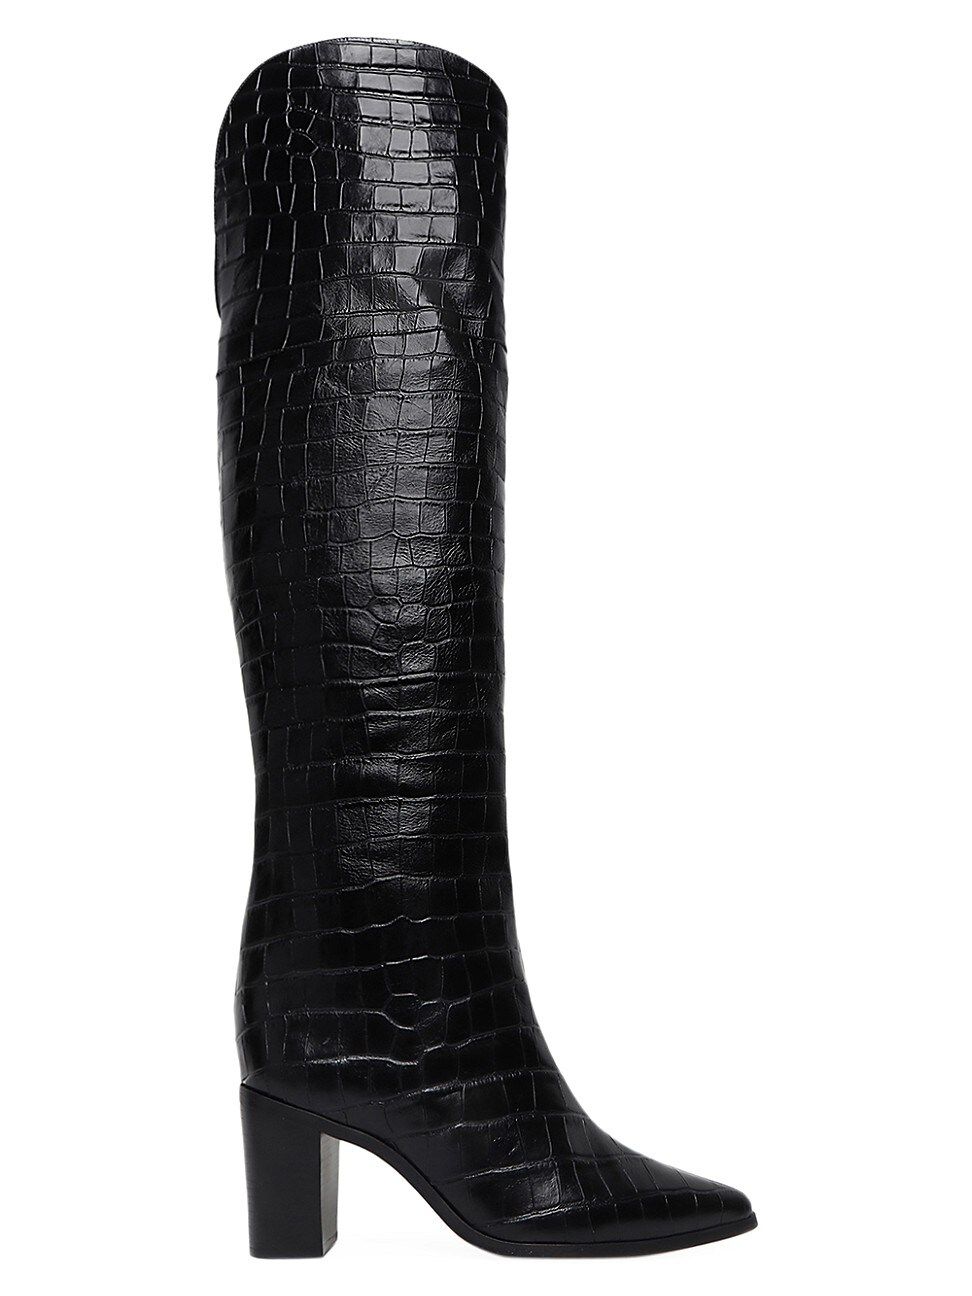 Schutz Women's Anaisha Over-The-Knee Croc-Embossed Leather Boots - Black - Size 8.5 | Saks Fifth Avenue